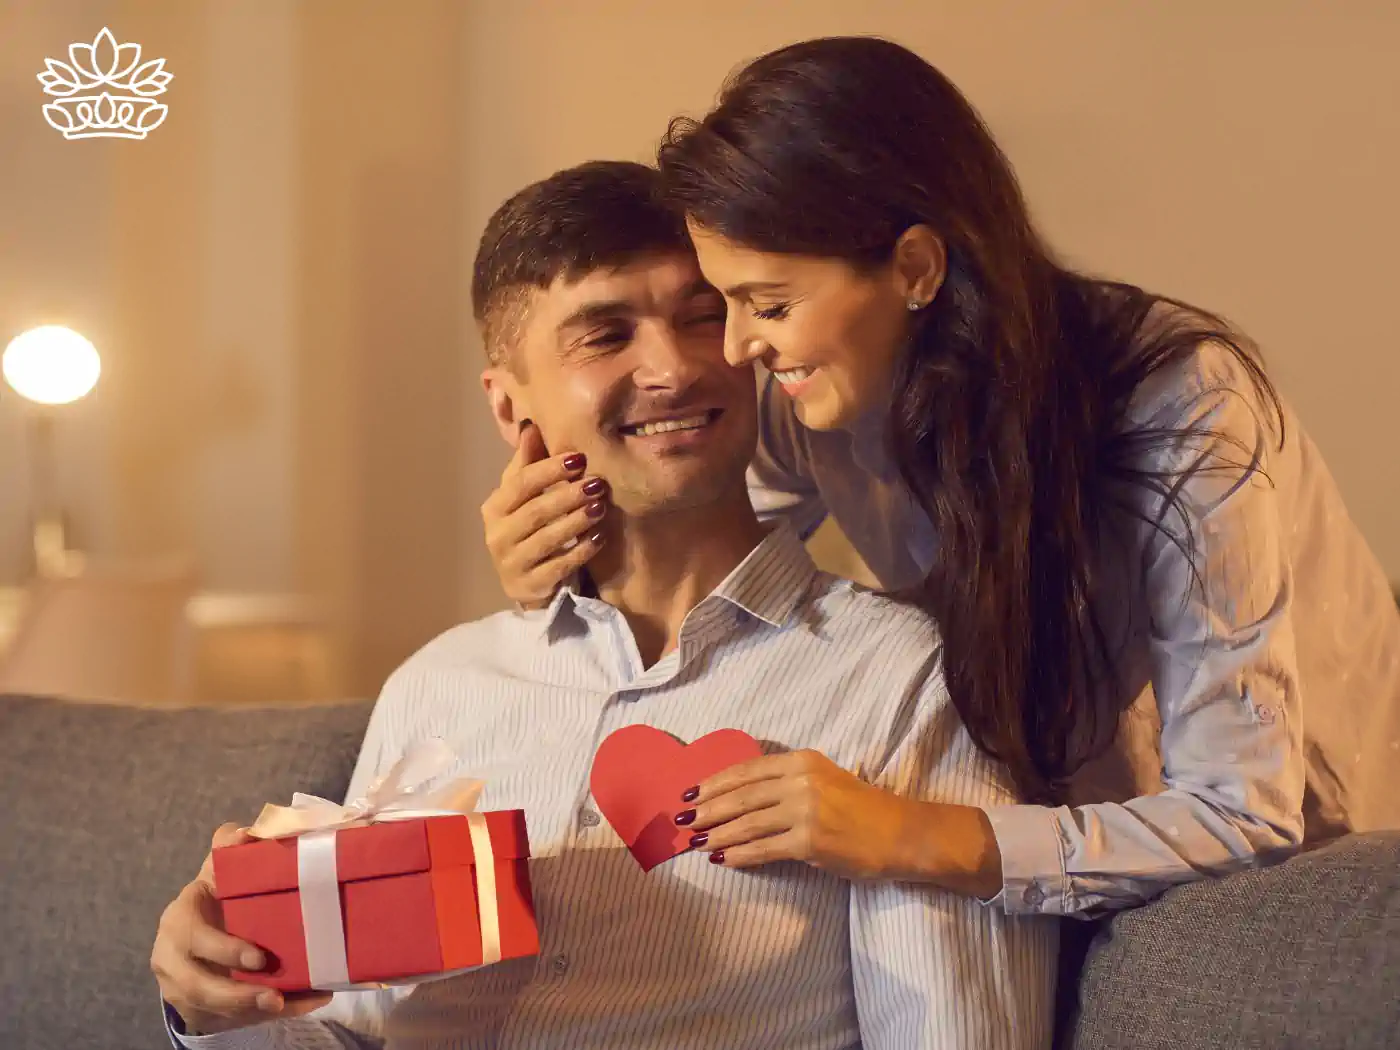 Man happily receiving a Valentine's Day gift box from a woman, expressing love and affection in a cozy home setting. Fabulous Flowers and Gifts.